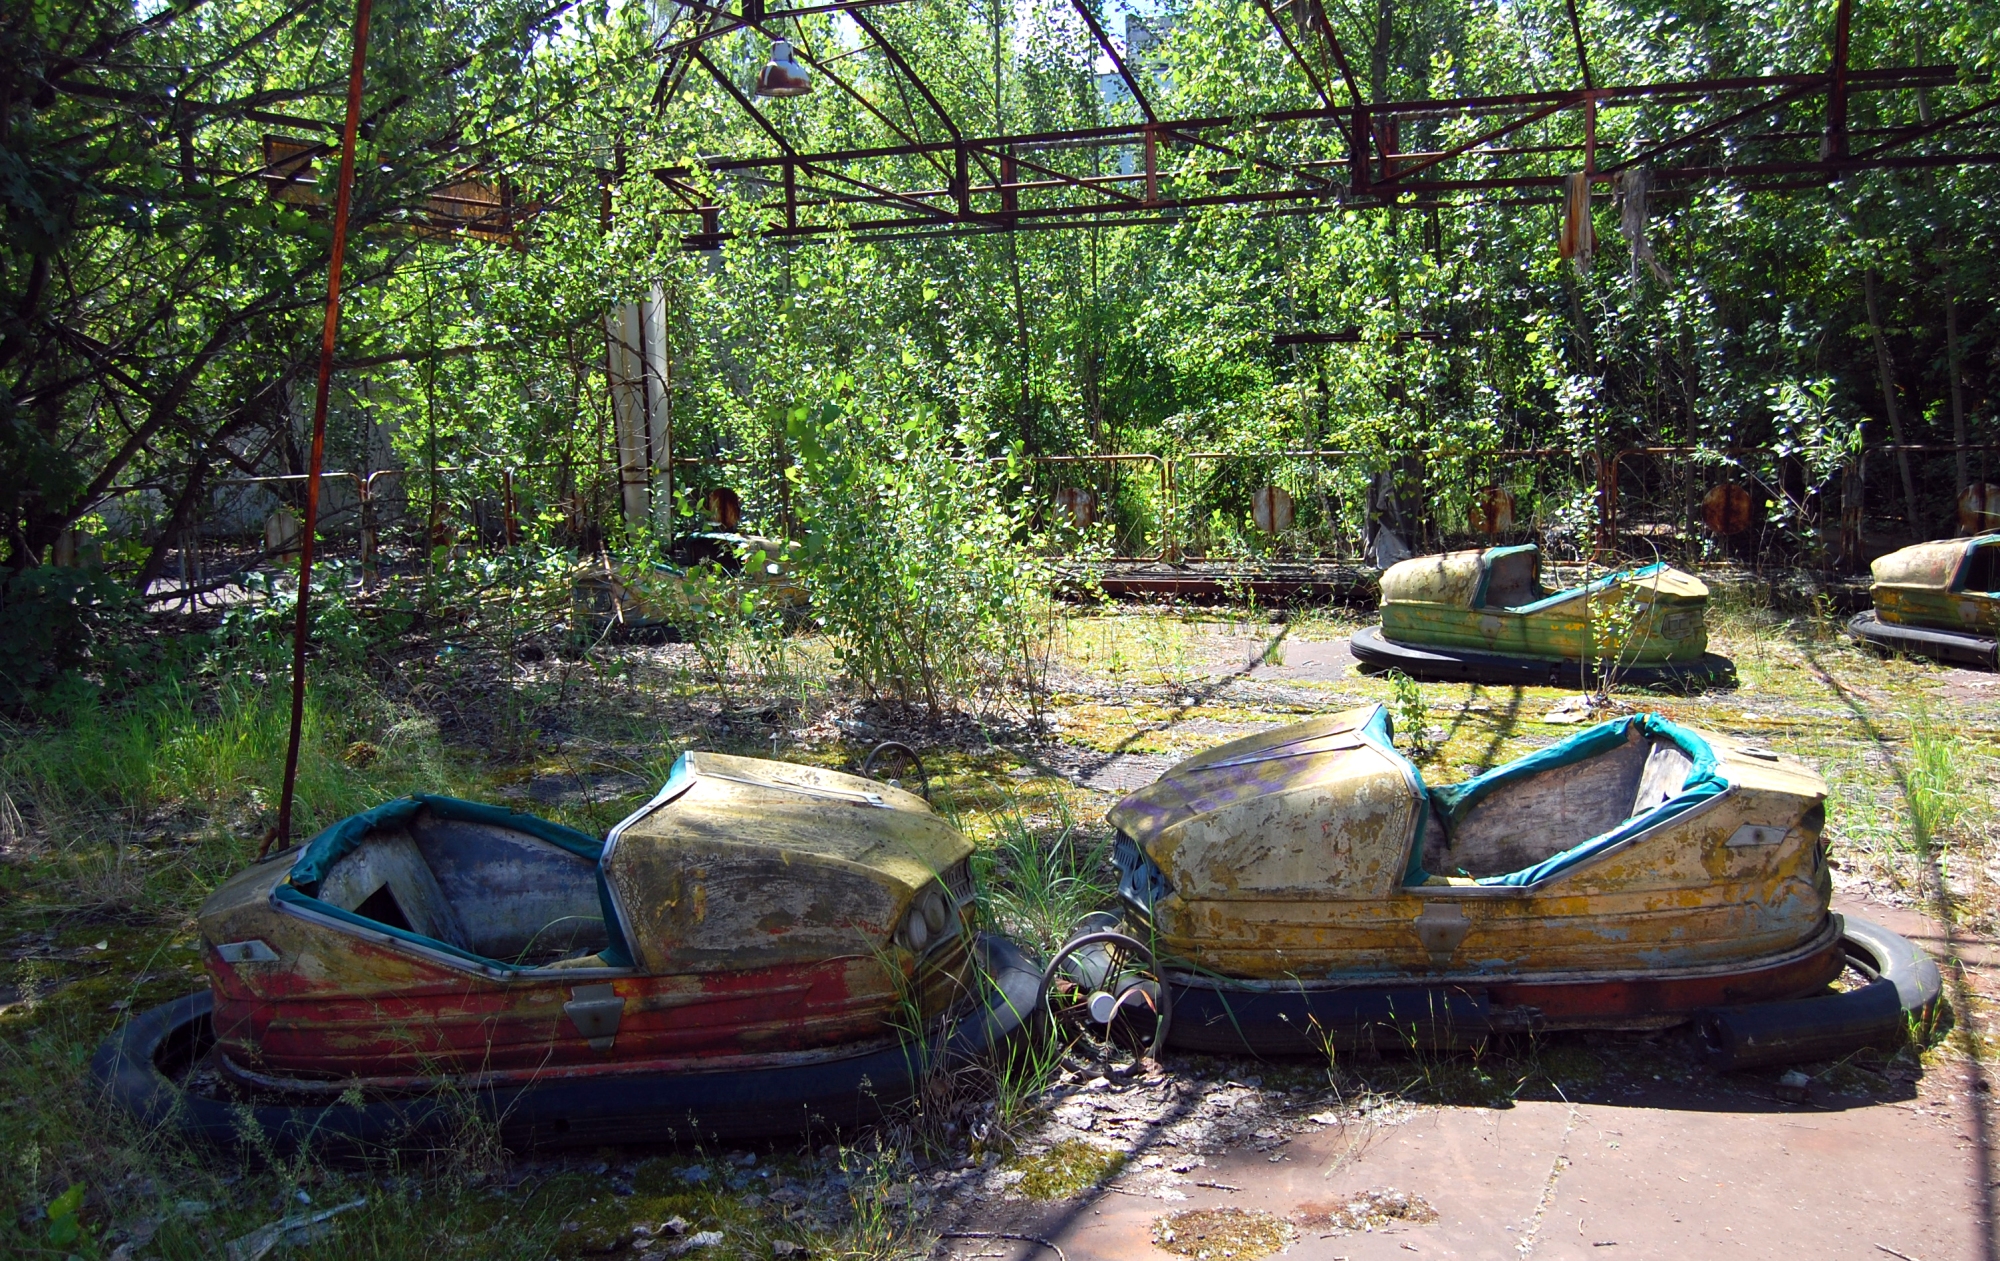 Visiting Chernobyl includes seeing bumper cars at a fairground.